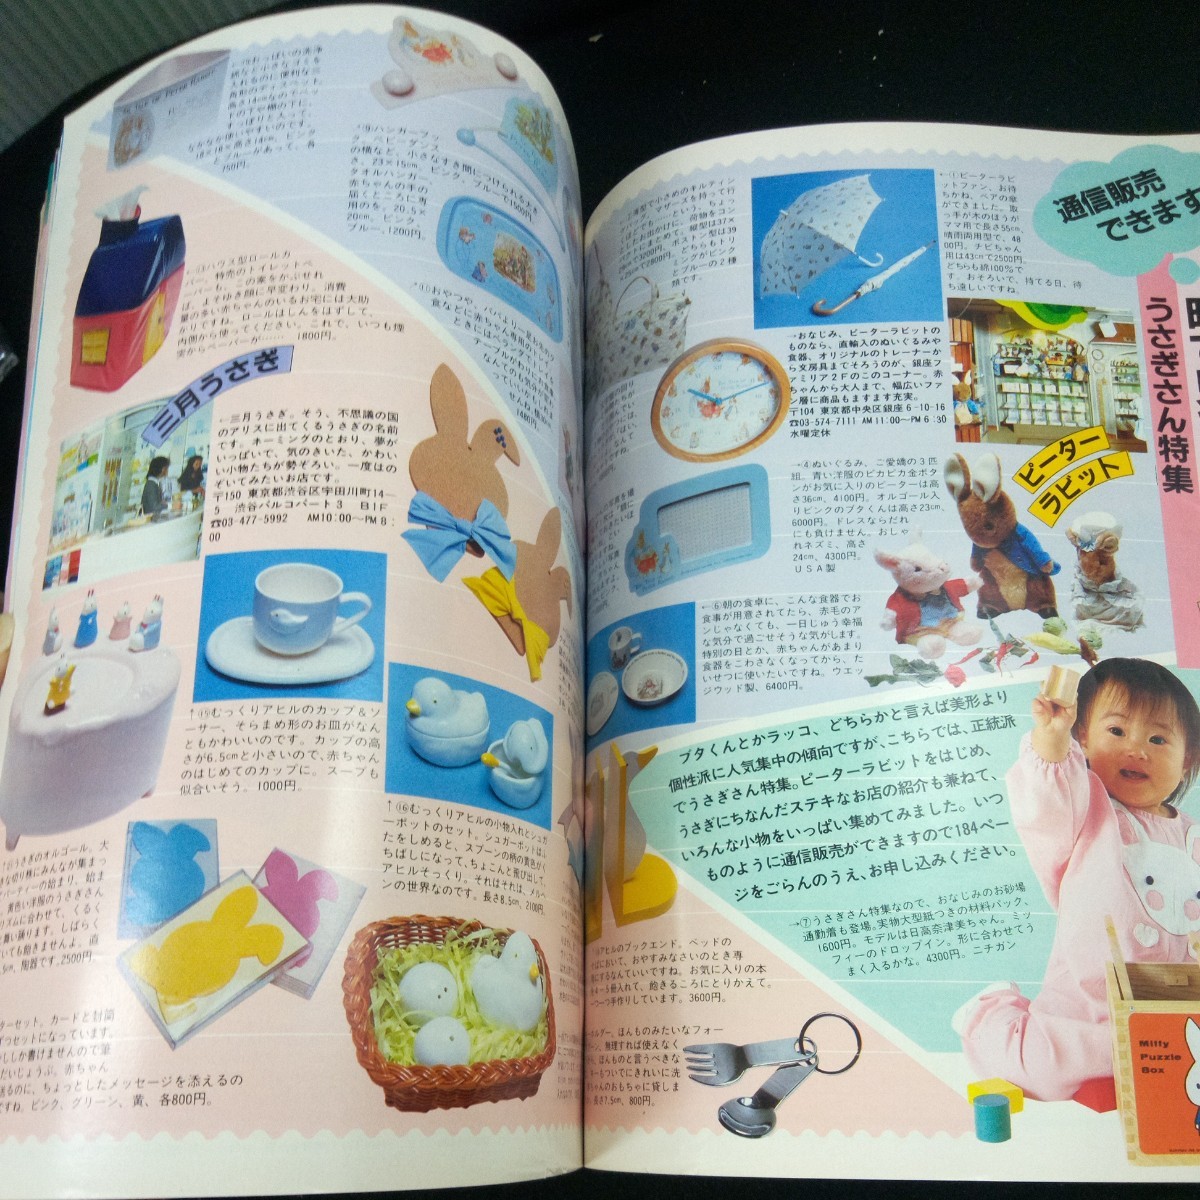 d-206 cotton plant .. baby Showa era 60 year issue 4 month number special collection diapers is .... also Q&A my childcare supplies using . none ....... mama become law *3